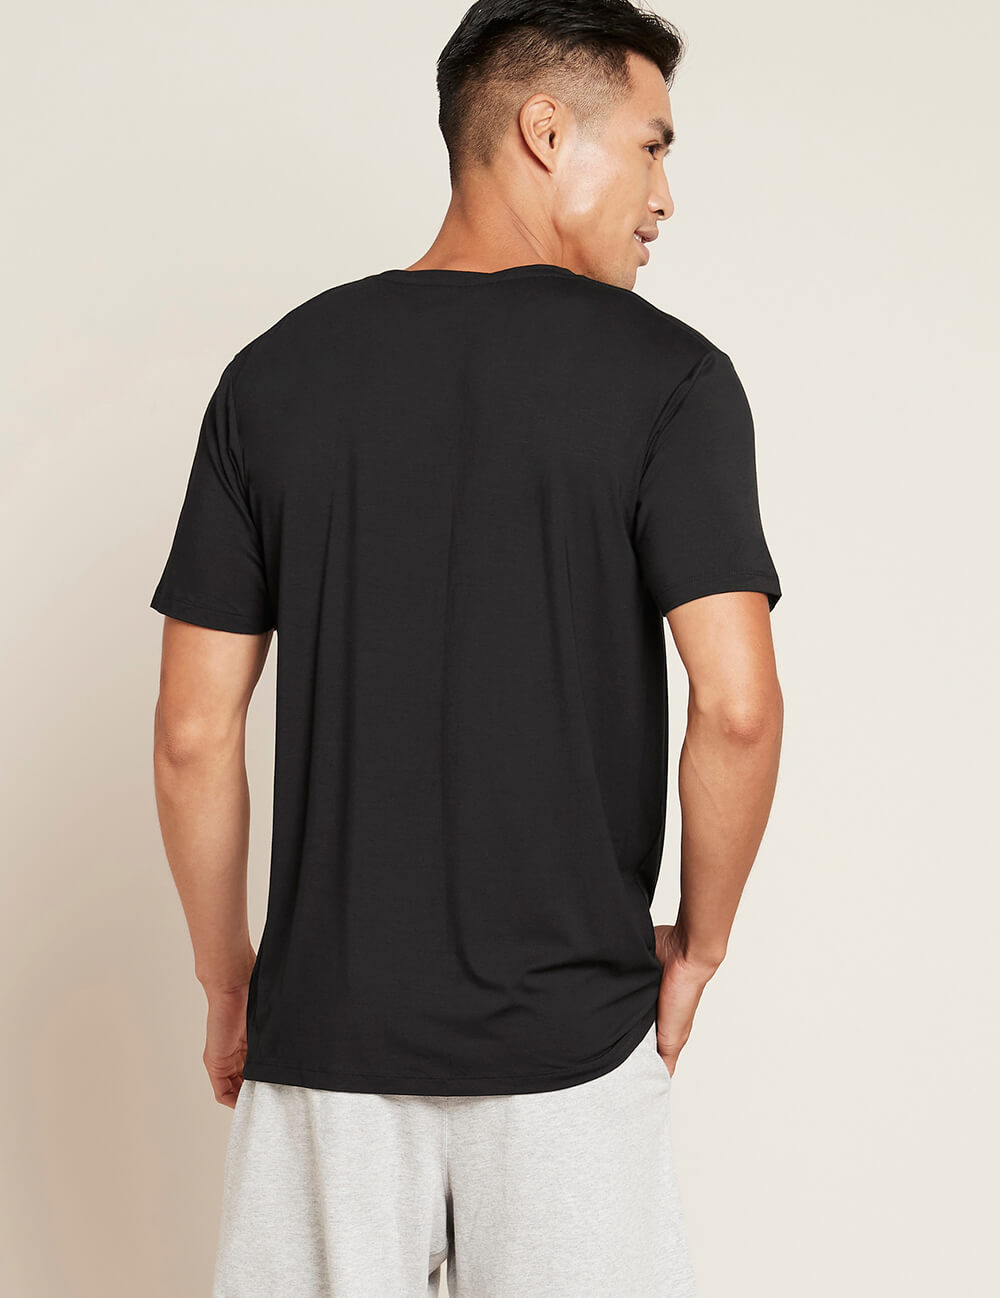 Boody Bamboo Mens Crew Neck Shirt in Black Back View